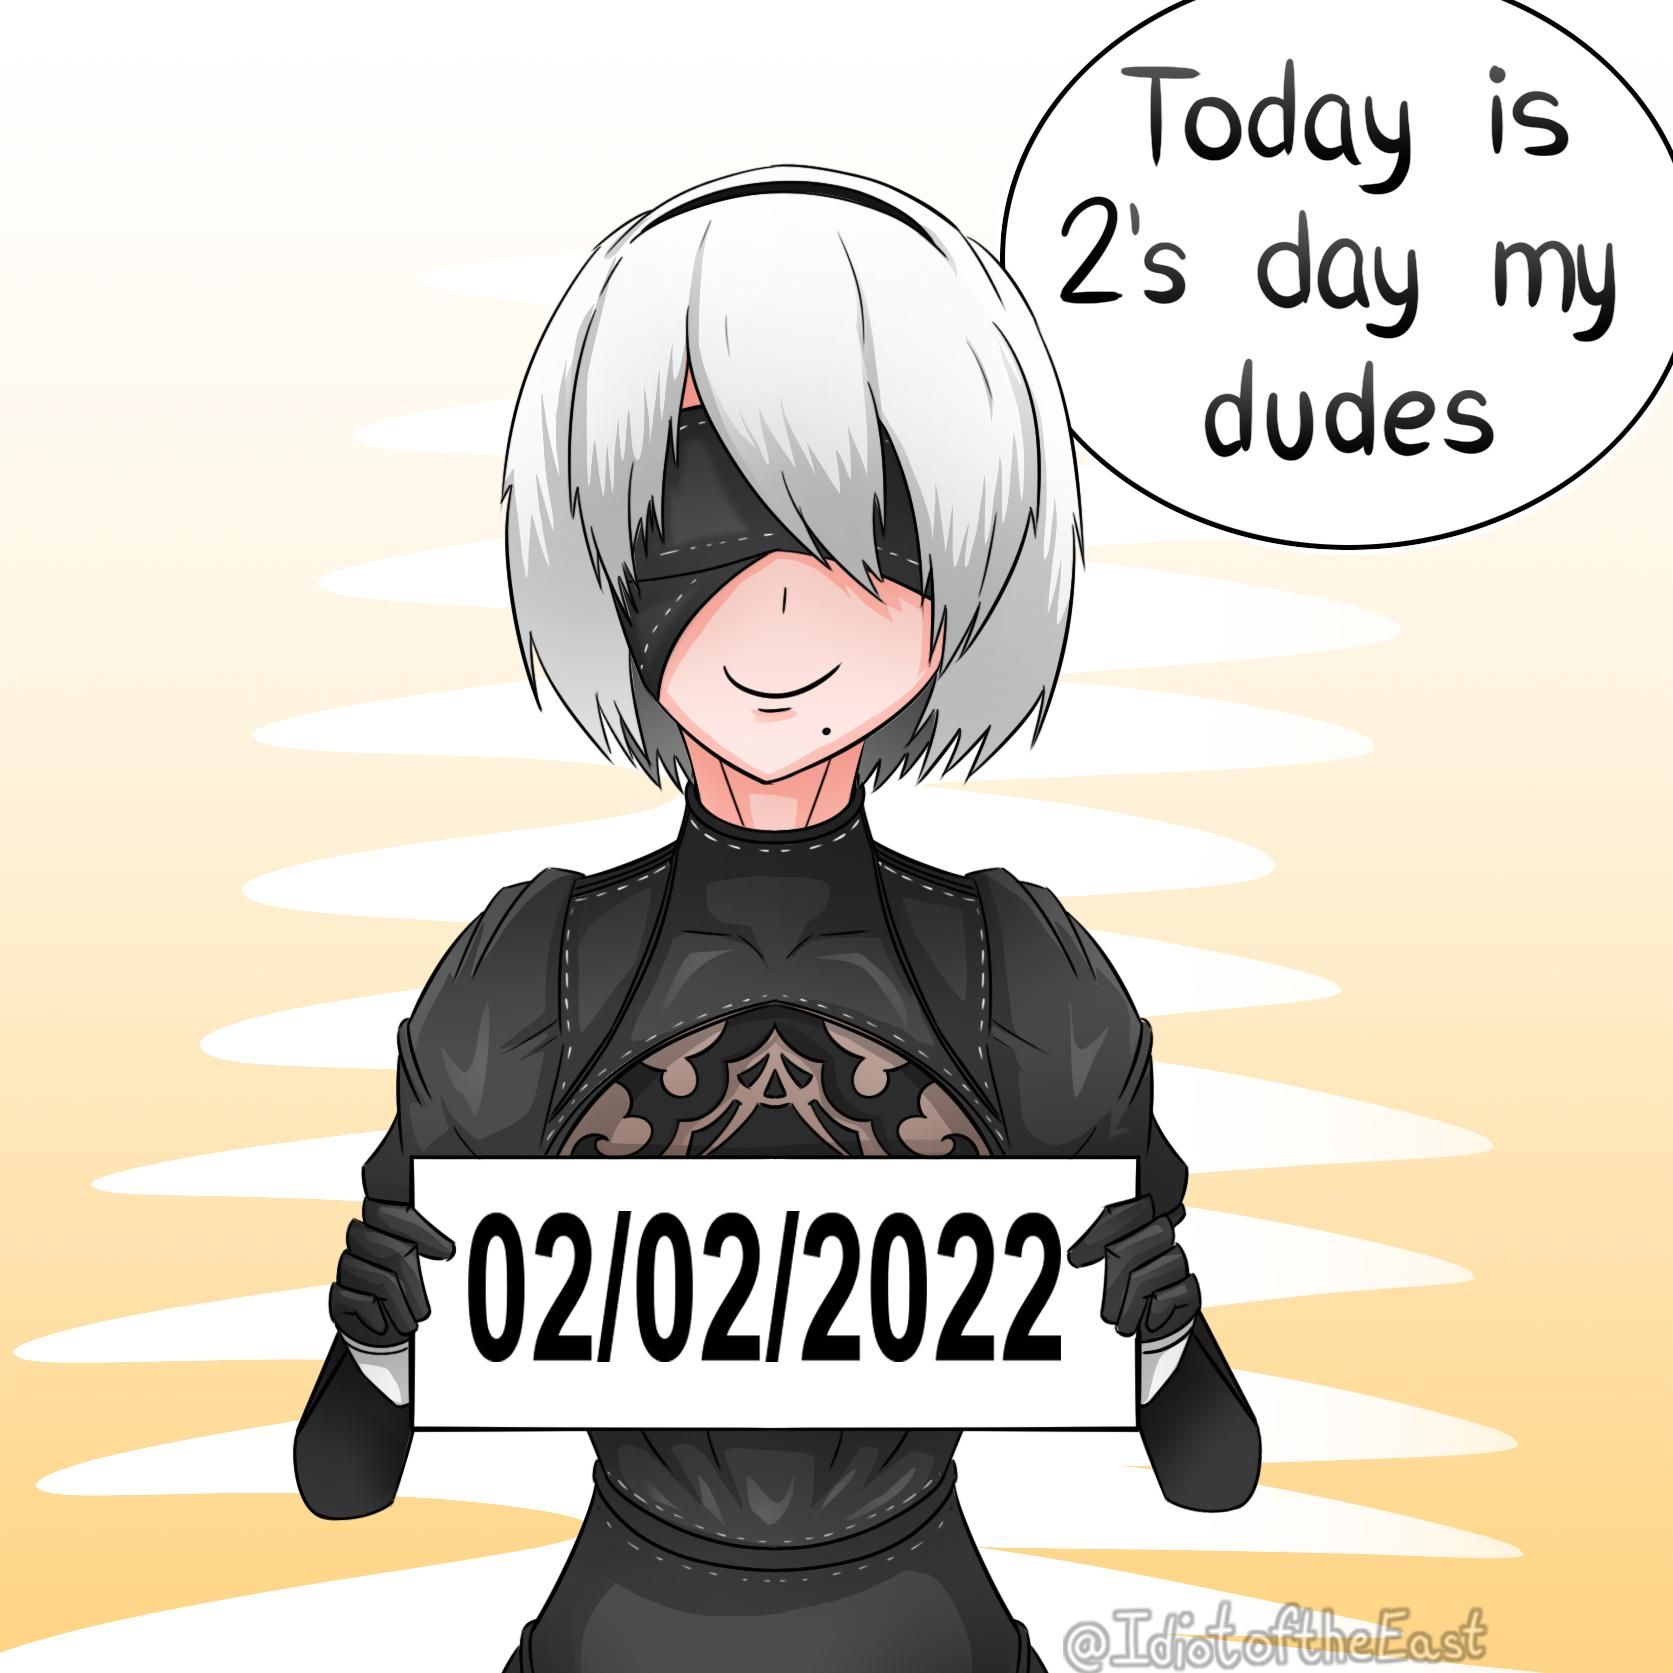 2-day is a special day